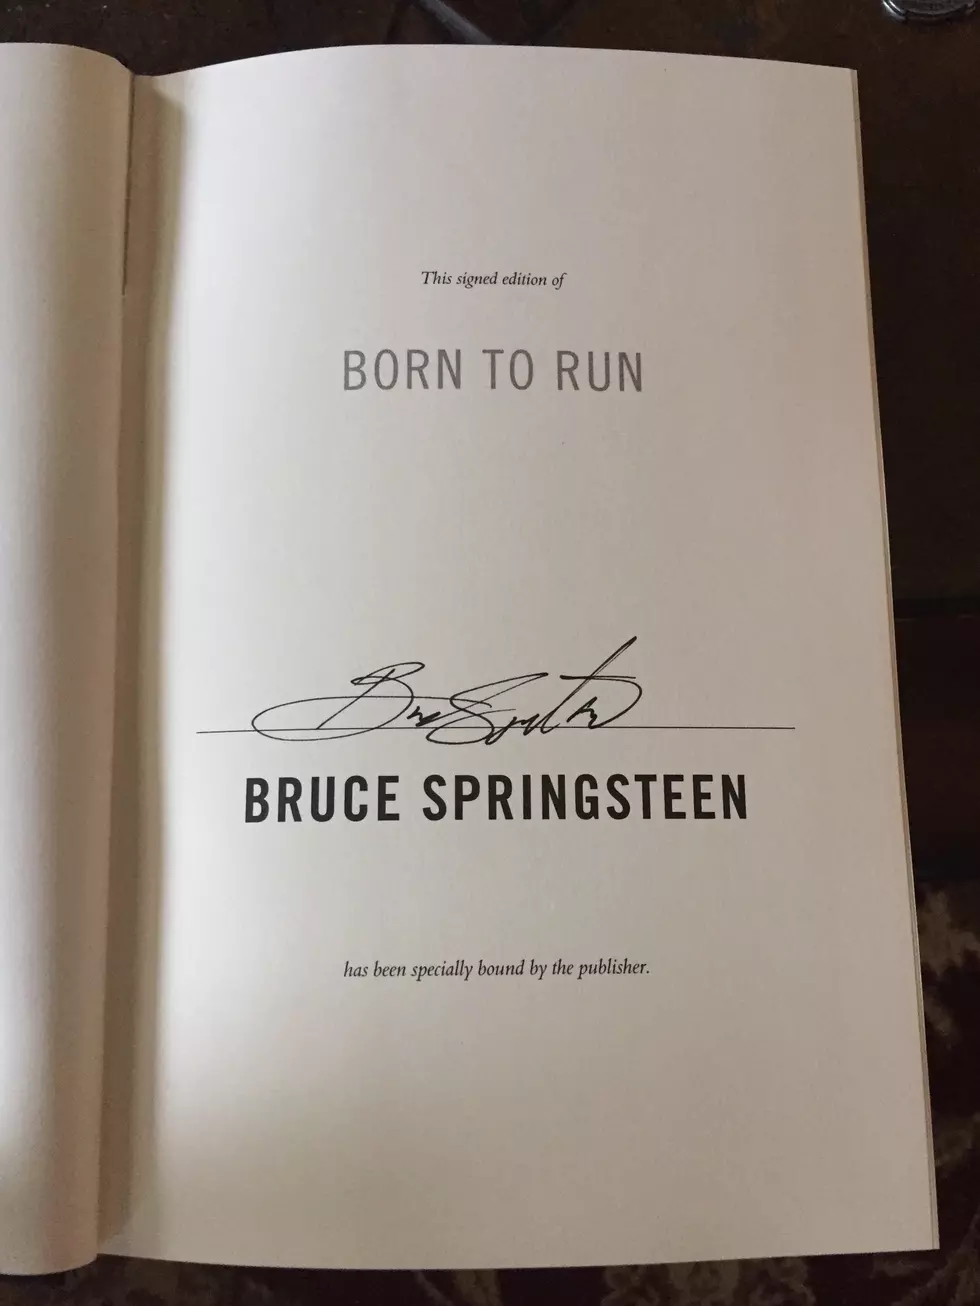 [Spoilers] The good, bad & ugly about Springsteen’s new book